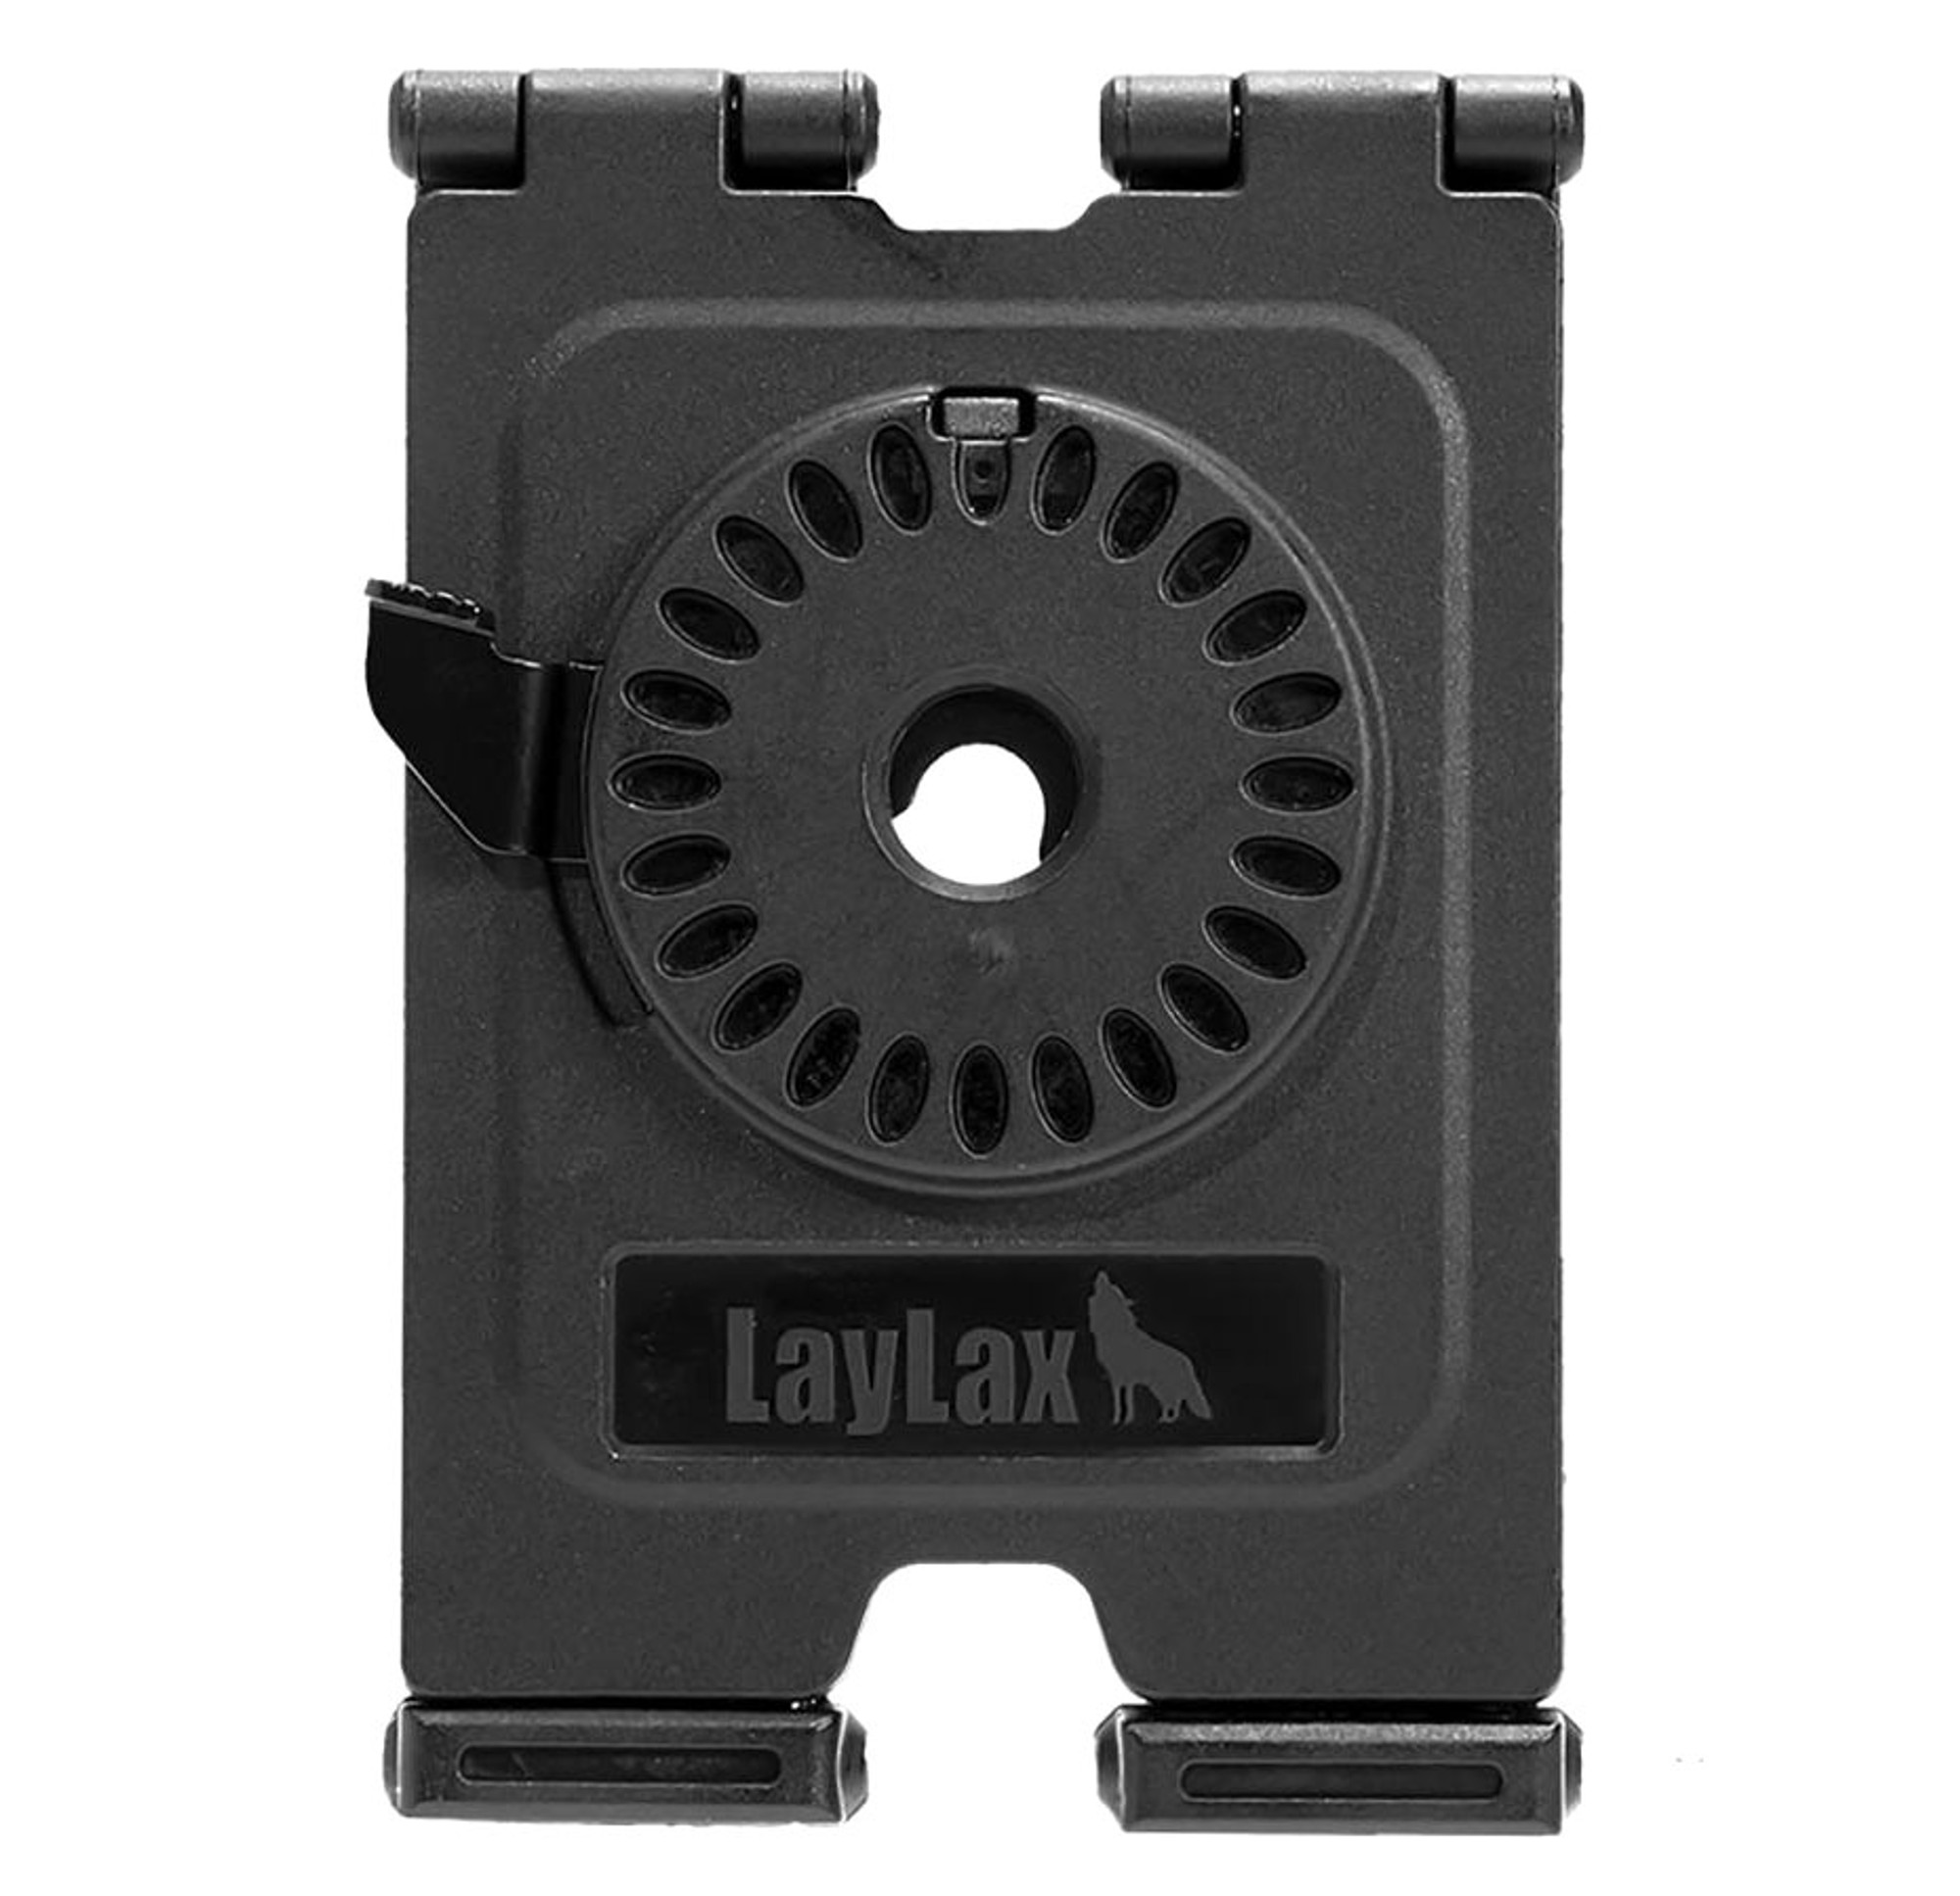 Laylax MOLLE Platform for CQC Battle-Style Holster